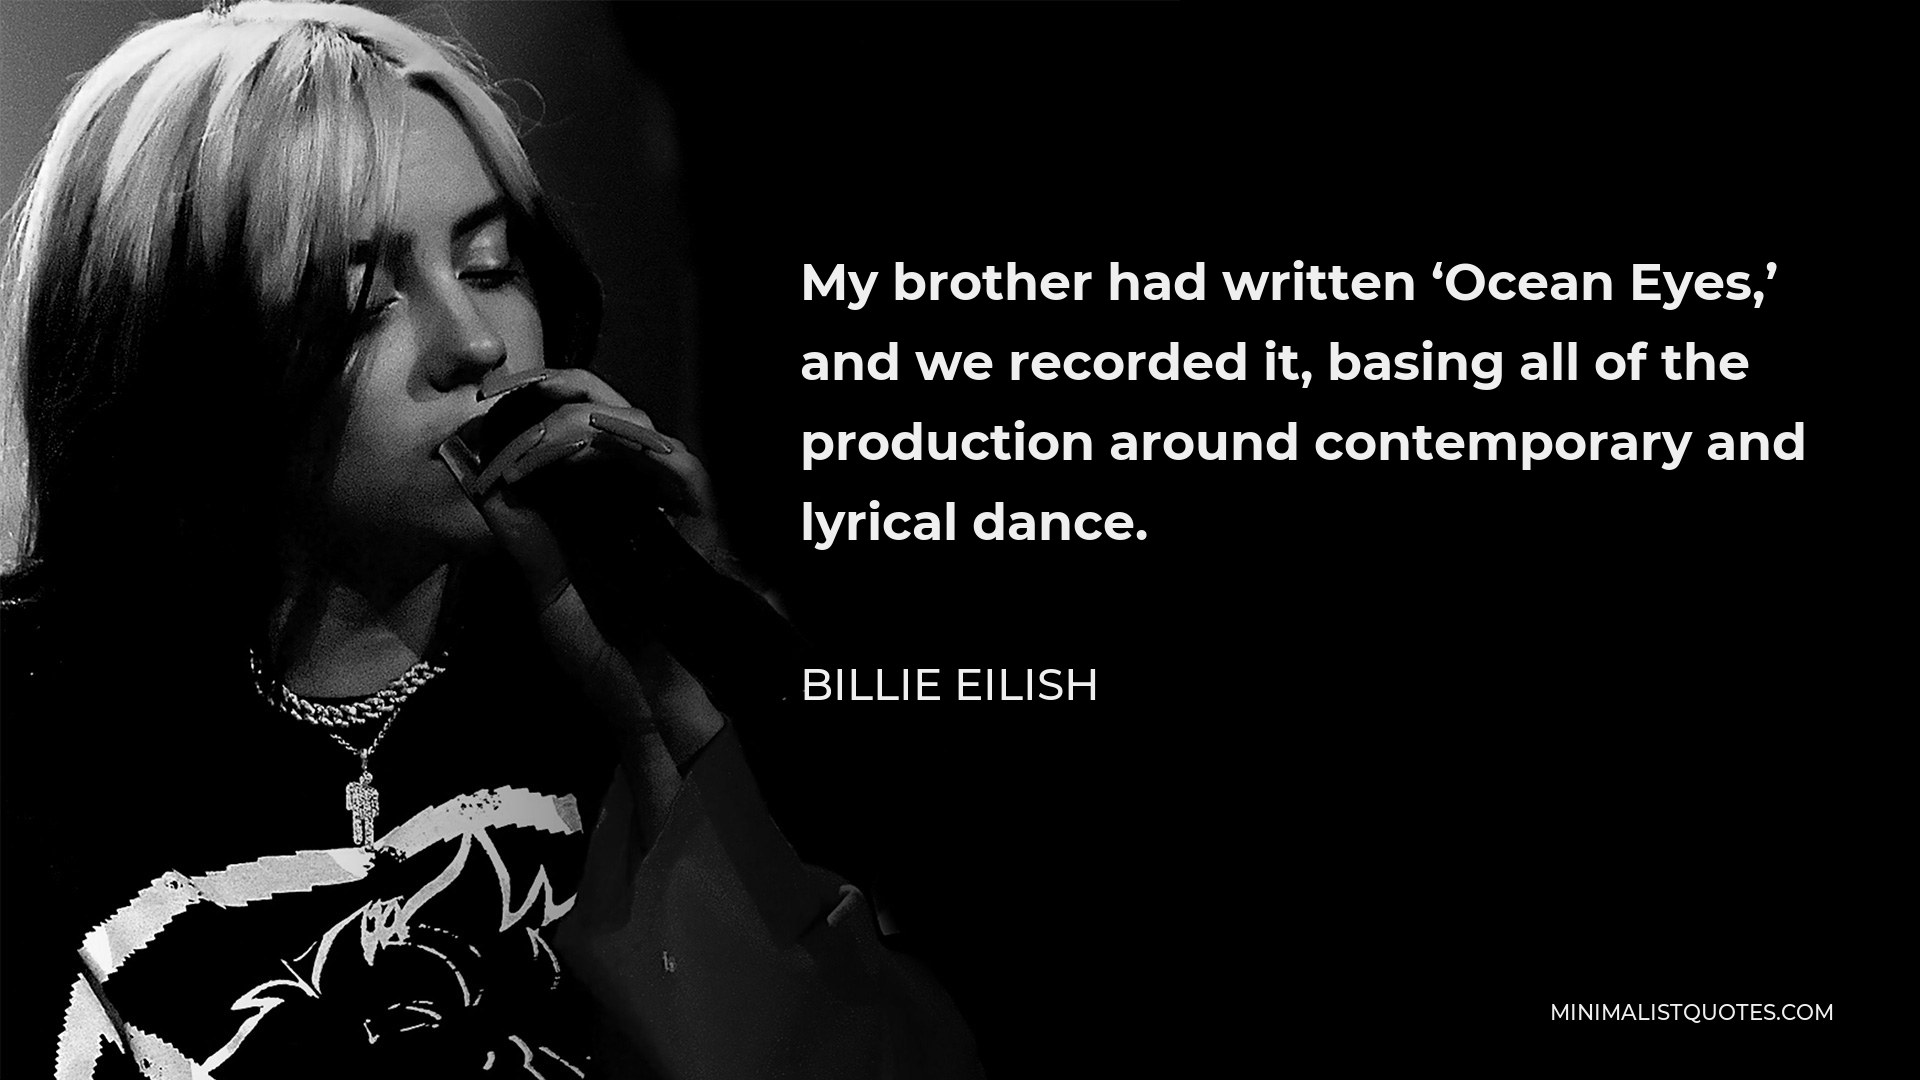 Billie Eilish Quote - My brother had written ‘Ocean Eyes,’ and we recorded it, basing all of the production around contemporary and lyrical dance.